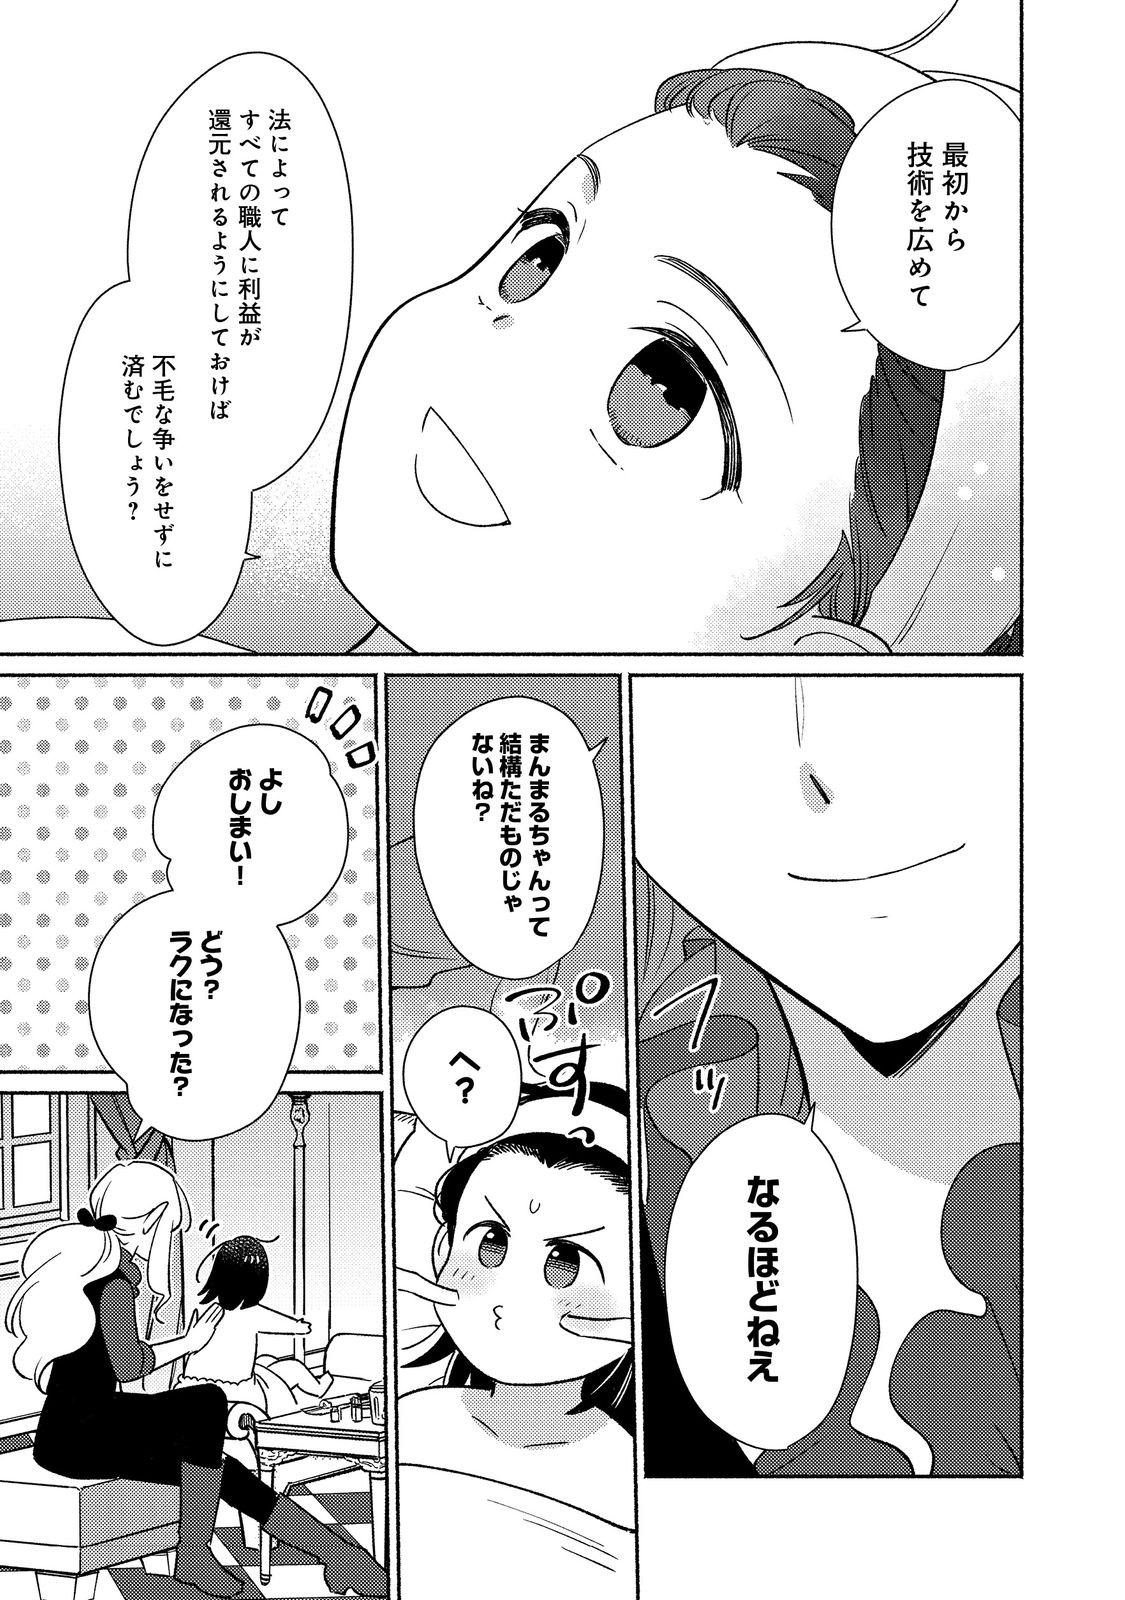 I’m the White Pig Nobleman 第20.1話 - Page 9